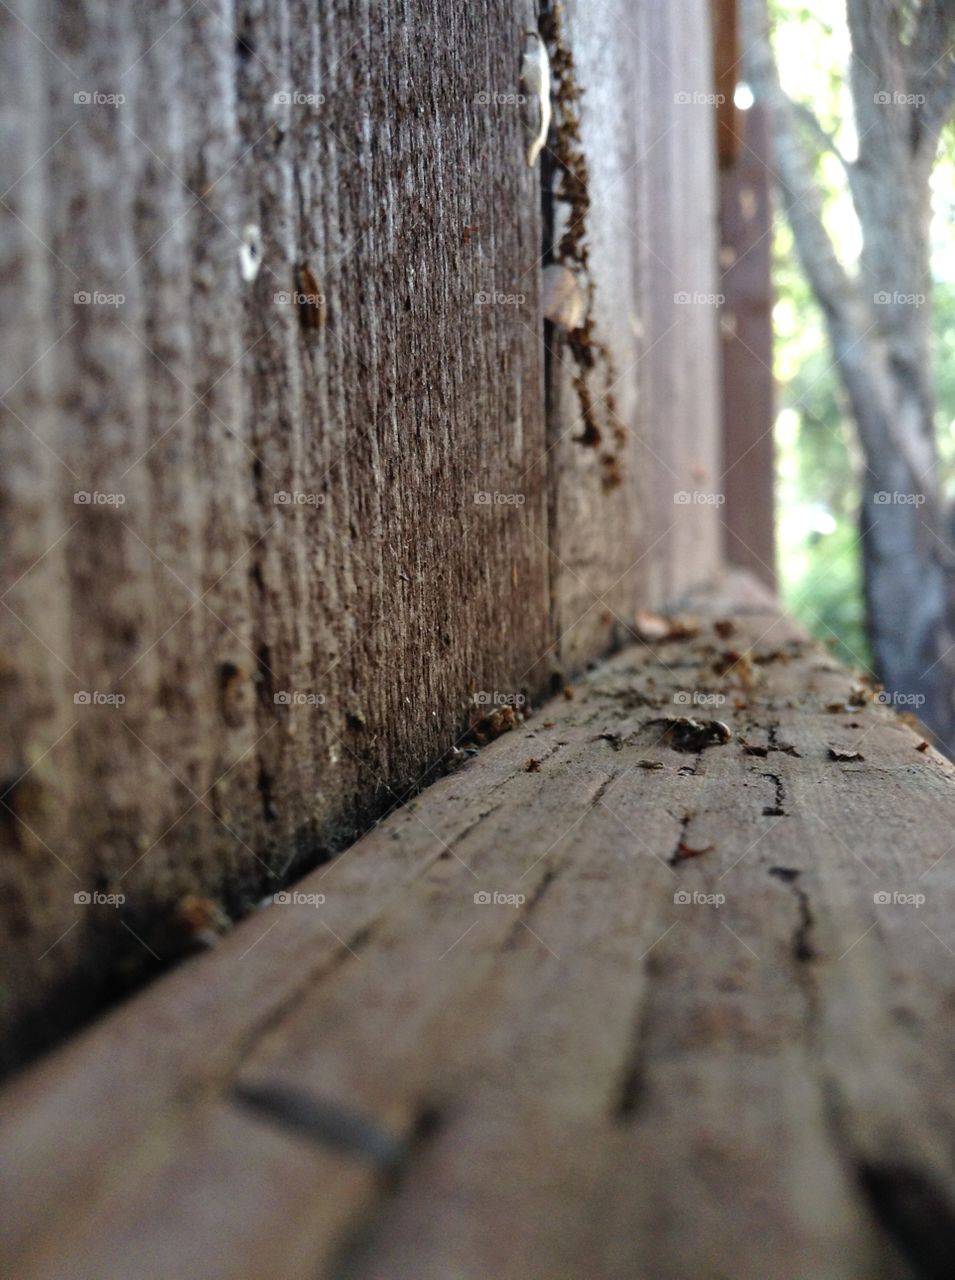 Worn Wooden Fence. Close up photos can show texture and the small aspects of life the naked eye can not see.
